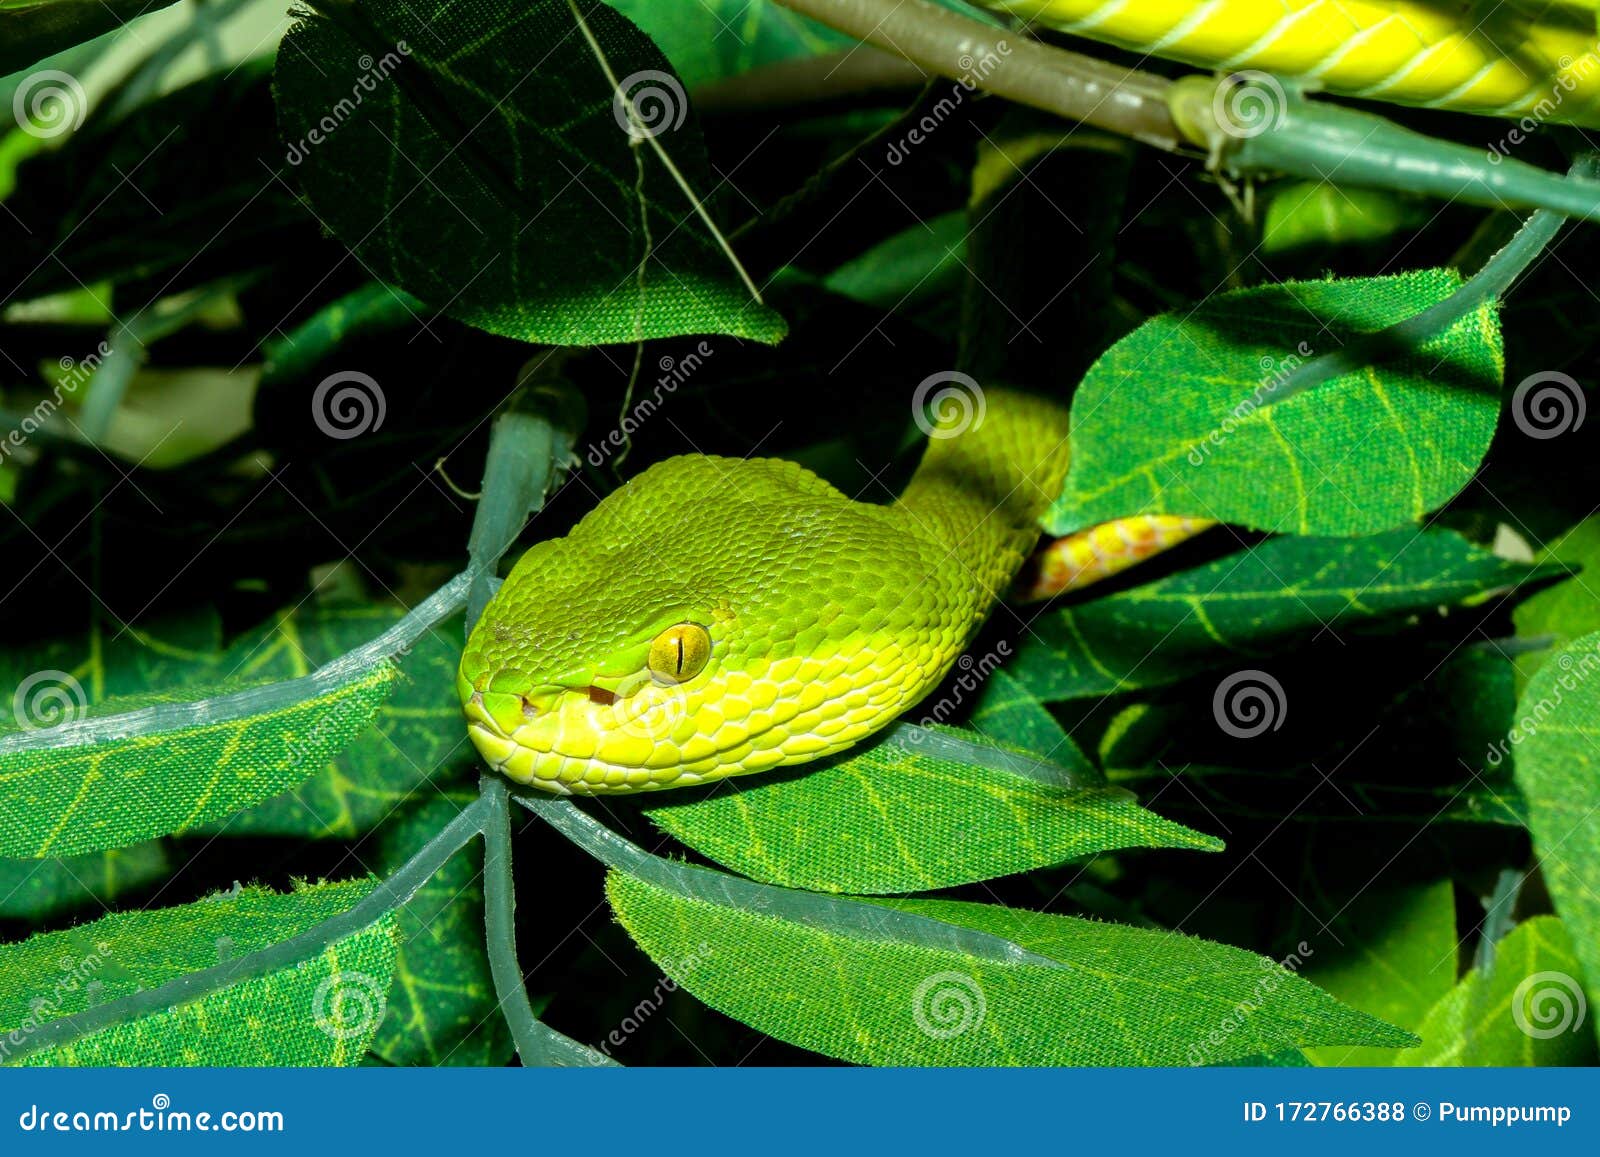 Close Up Green Pit Viper Snake In The Garden At Thailand Stock